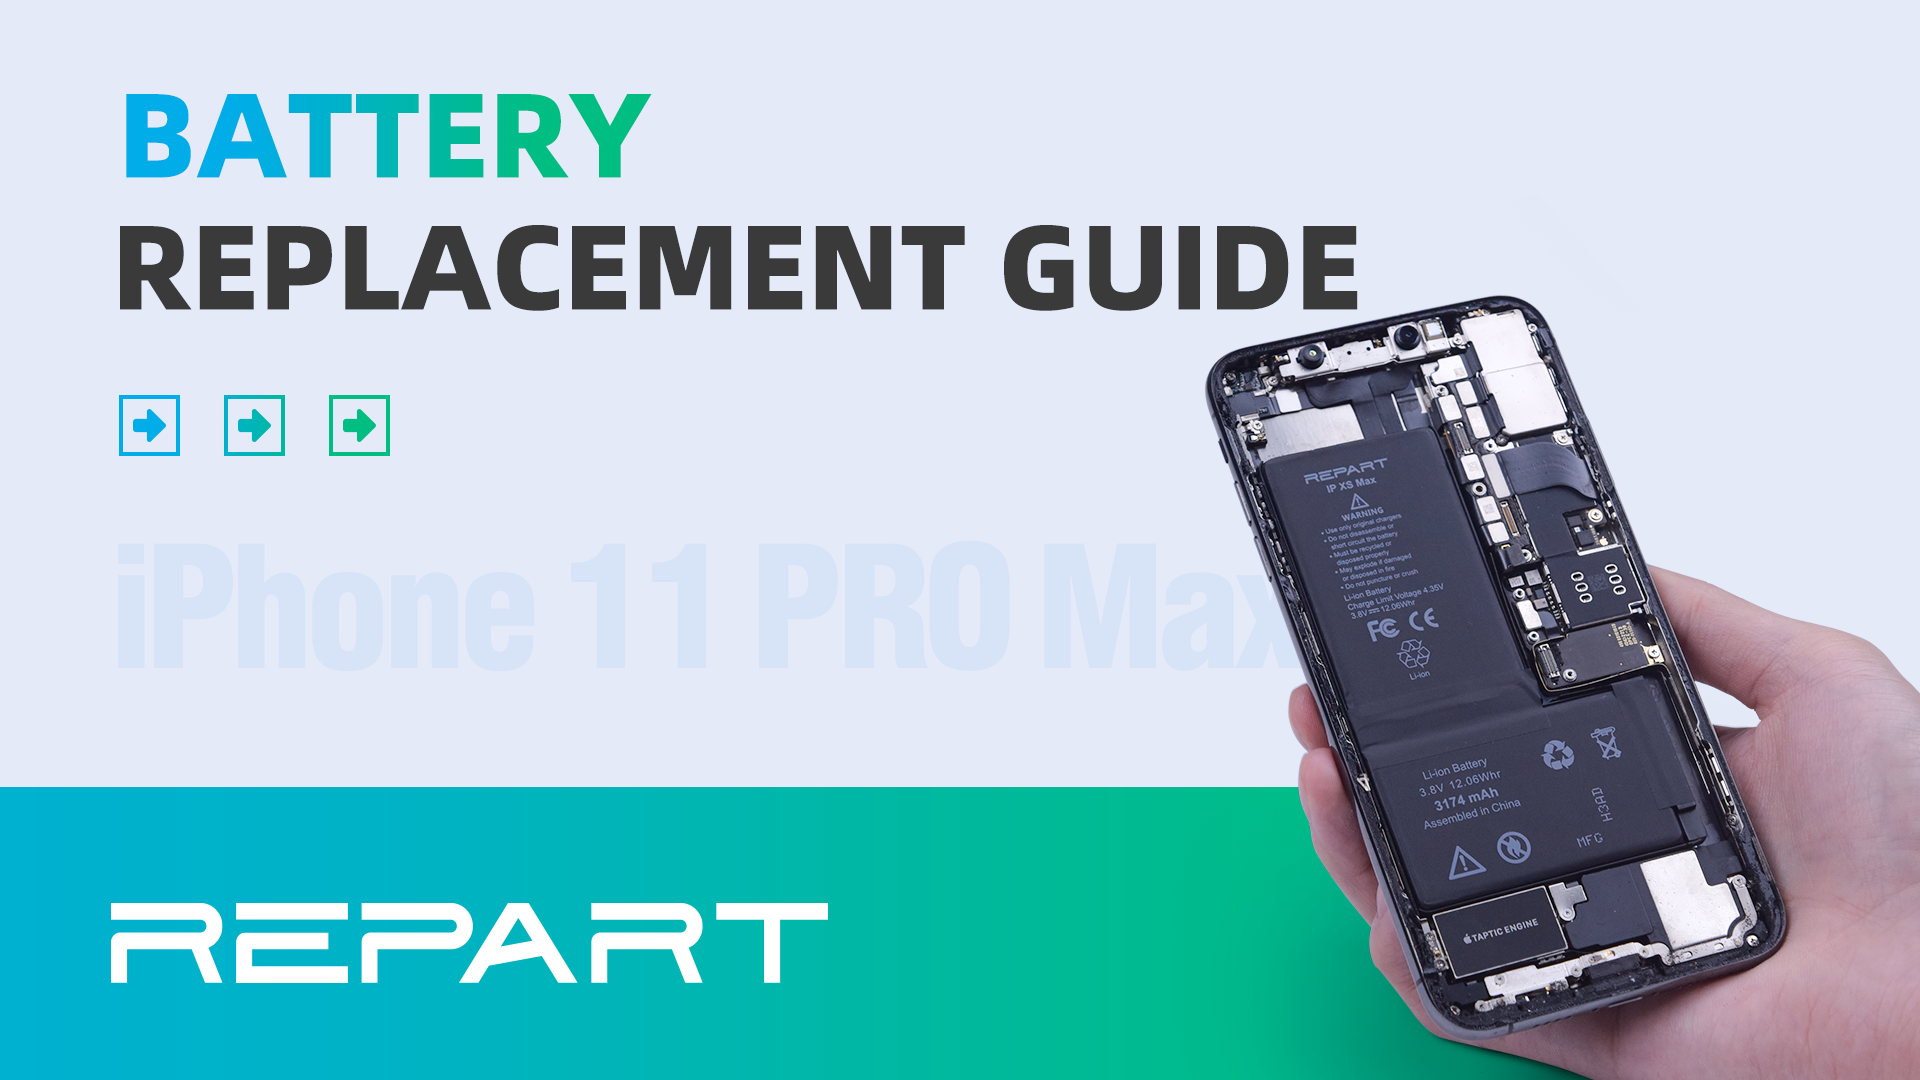 iPhone Battery Replacement Guide - Hands-on with REPART